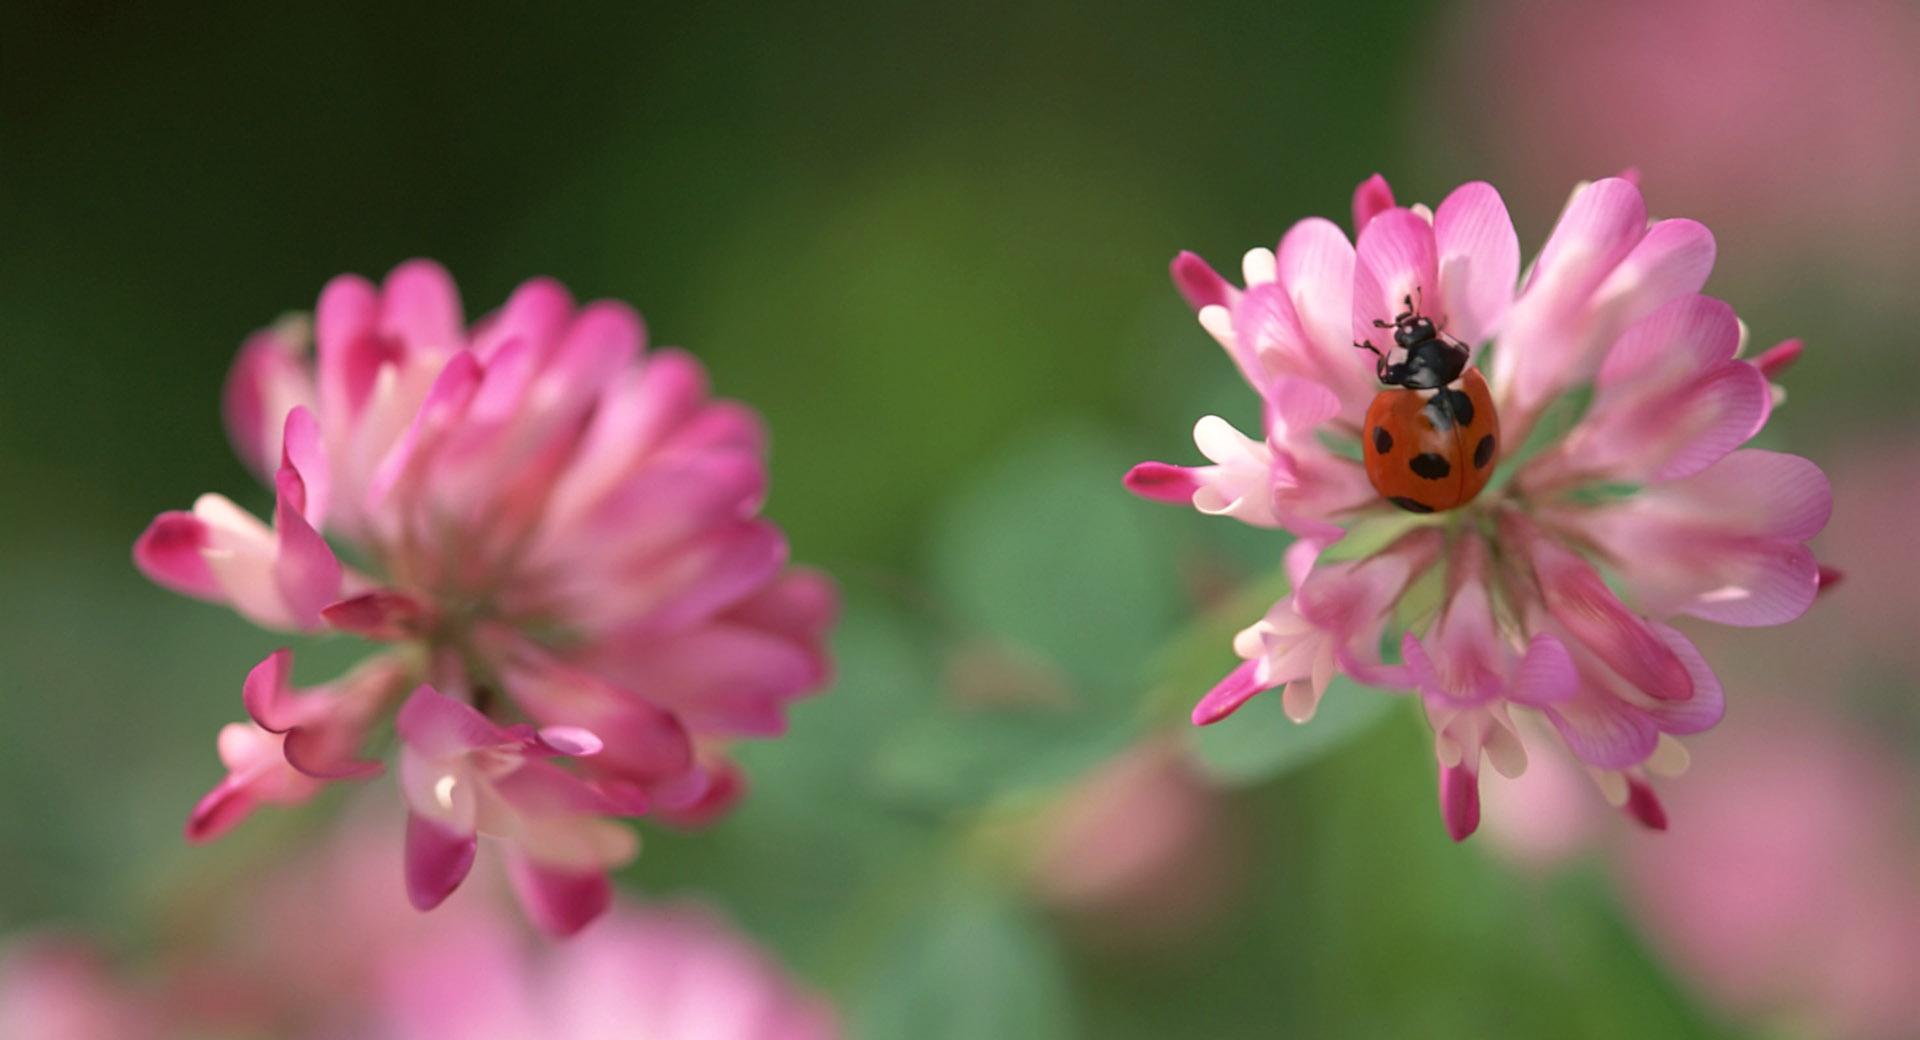 Ladybug On A Pink Clover Flower wallpapers HD quality